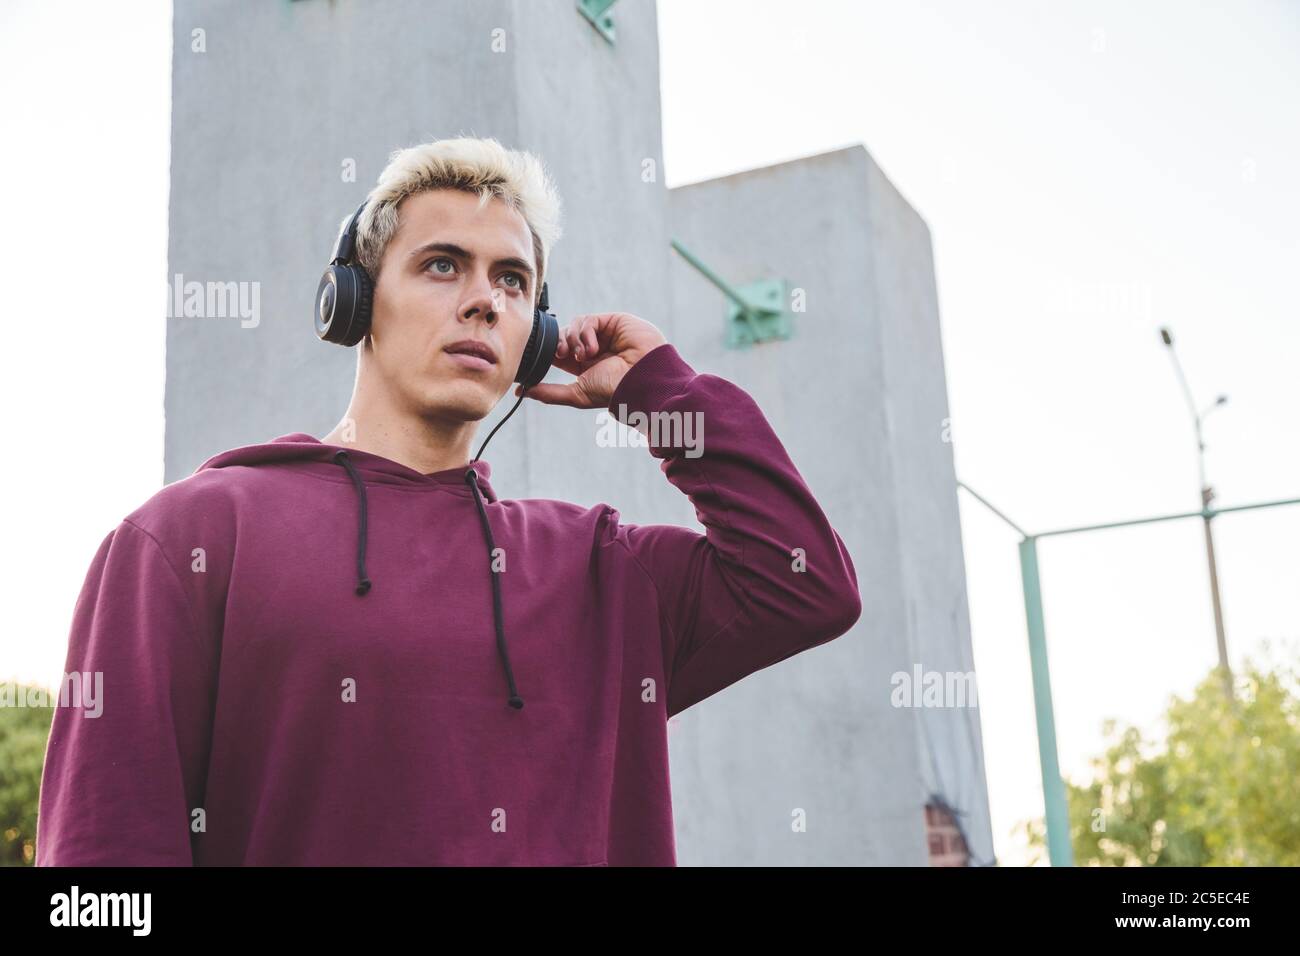 Young sports man in hoodie with headphones on work out area Stock Photo